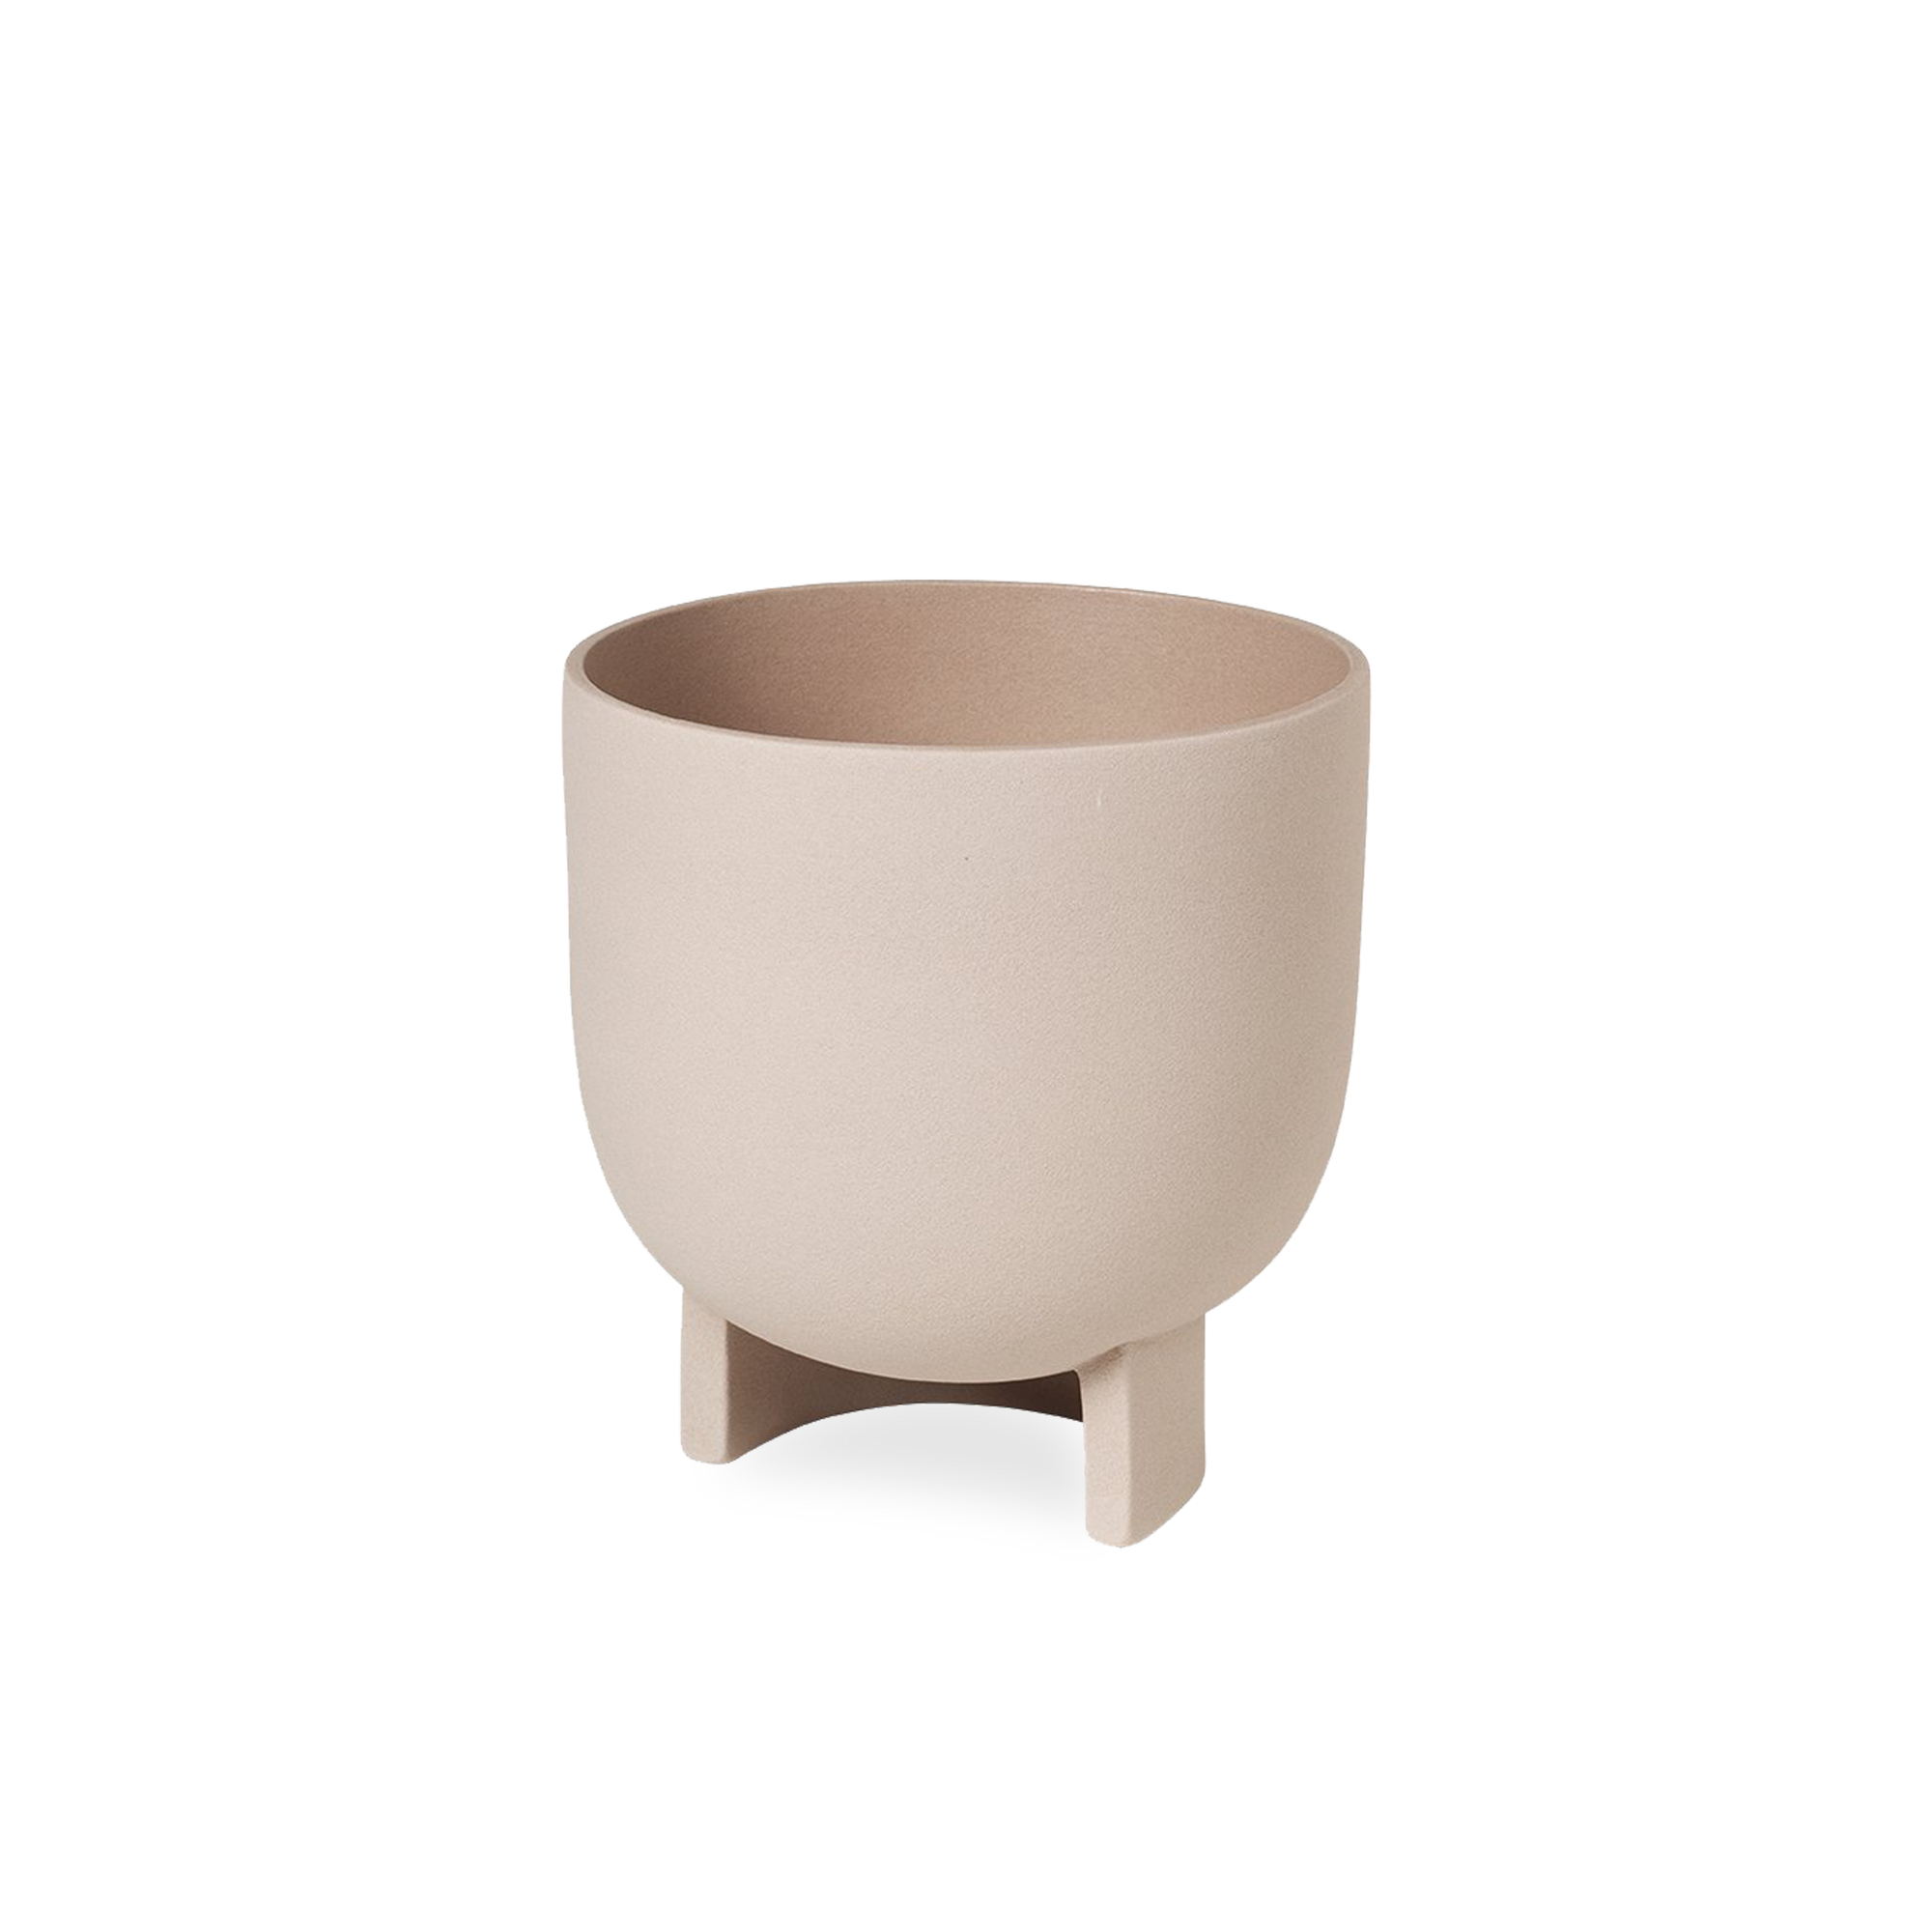 This decorative flower pot is made out of durable terracotta and the final finish is made with a stylish red engobe.